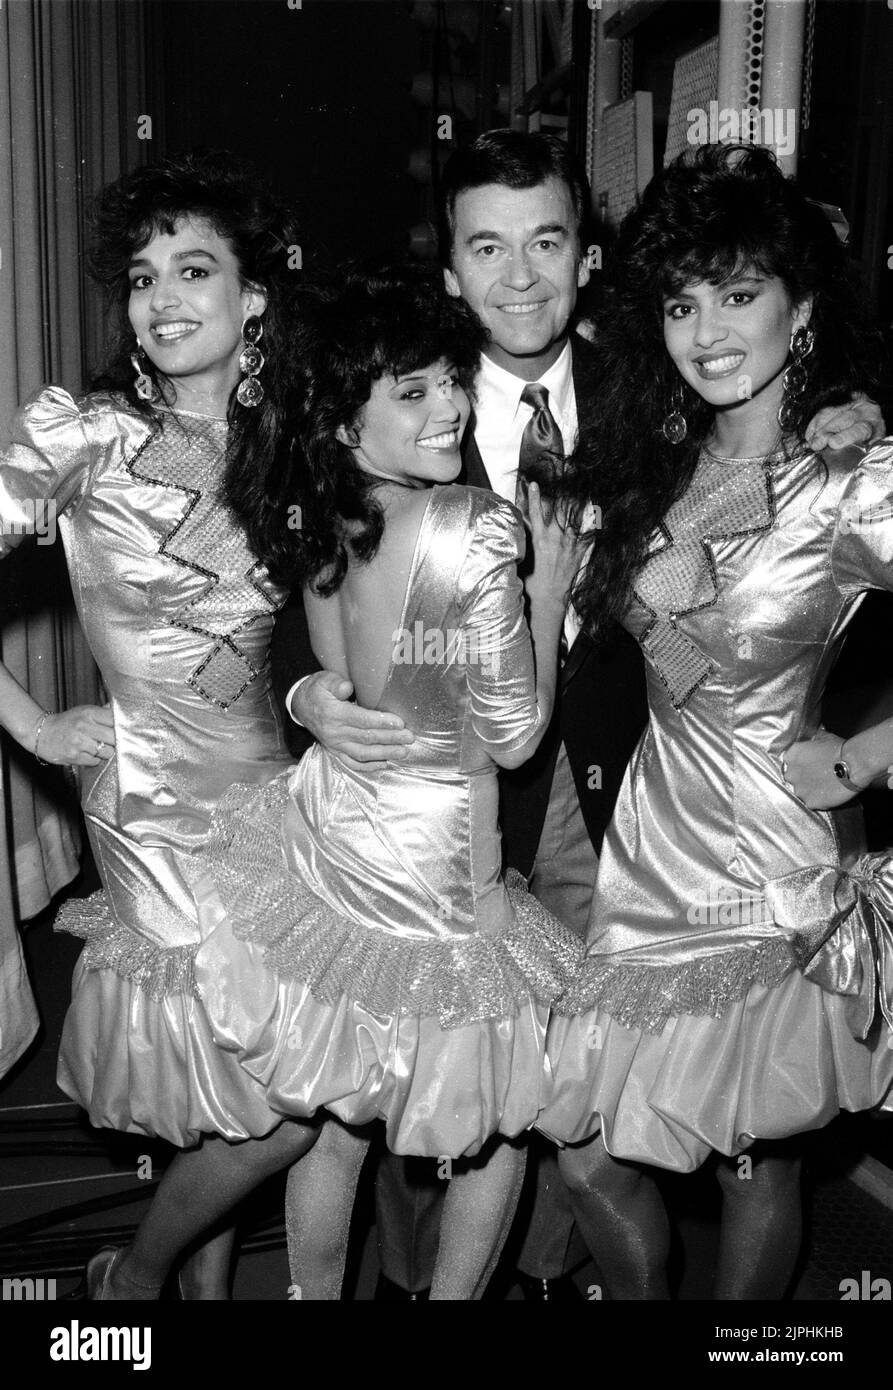 The Cover Girls on American Bandstand 1985 Credit: Ron Wolfson / MediaPunch Stockfoto